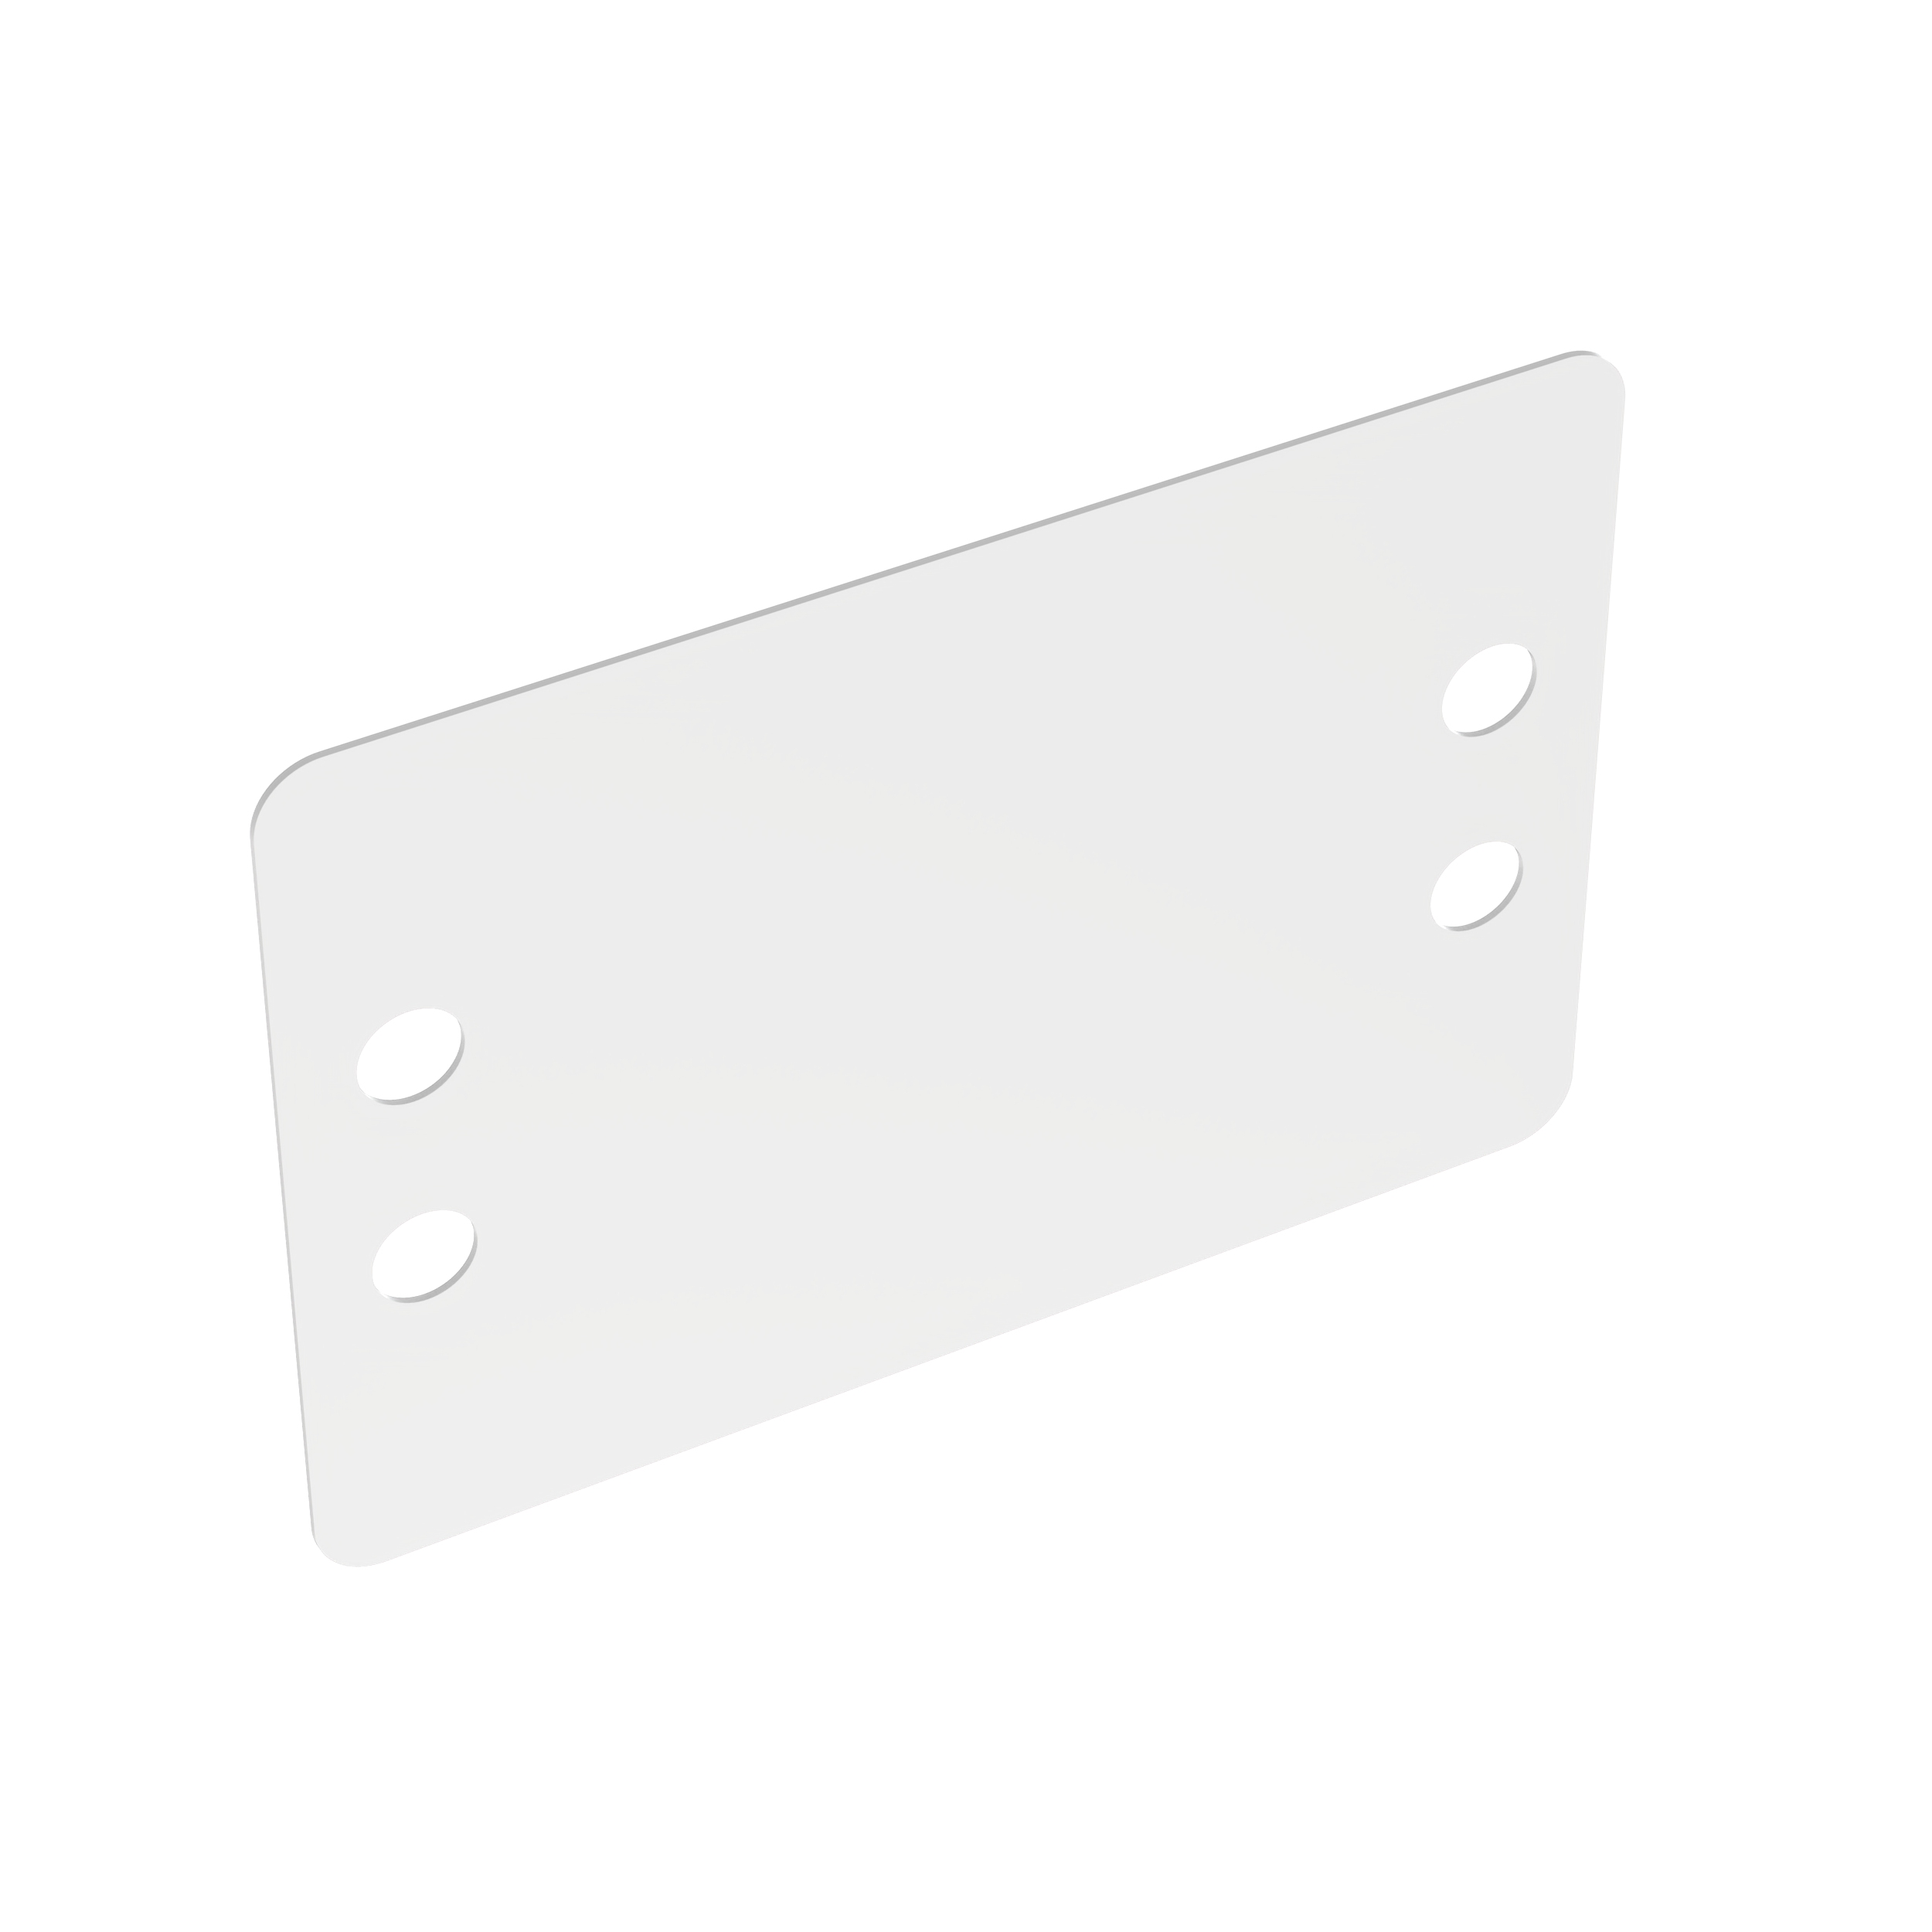 MP250W175-M Marker Plate, White, PA 6.6, Cable Tie, 2.5x1.75", PK1000